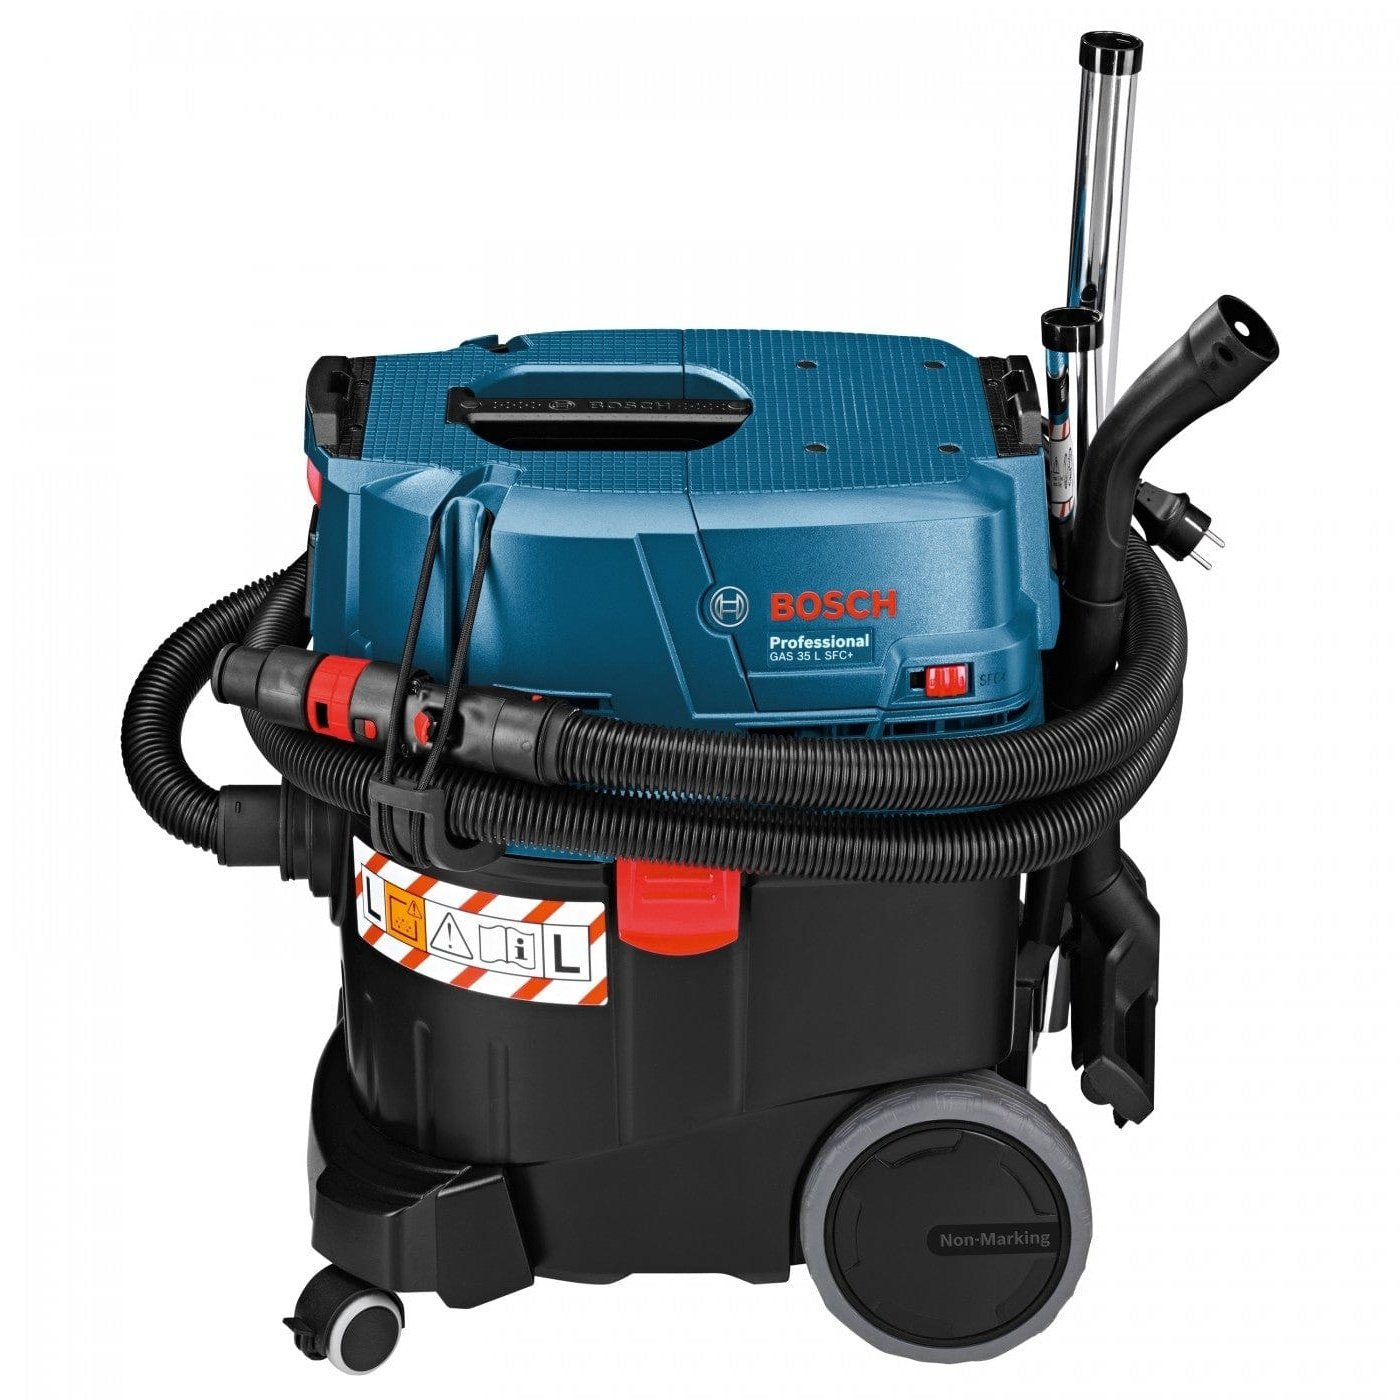 Maintain a clean and healthy workspace with the Bosch 35L Construction Dust Extractor 1200W (GAS 35 L SFC+) at SupplyMaster.store in Ghana. Industrial Cleaning Equipment Buy Tools hardware Building materials